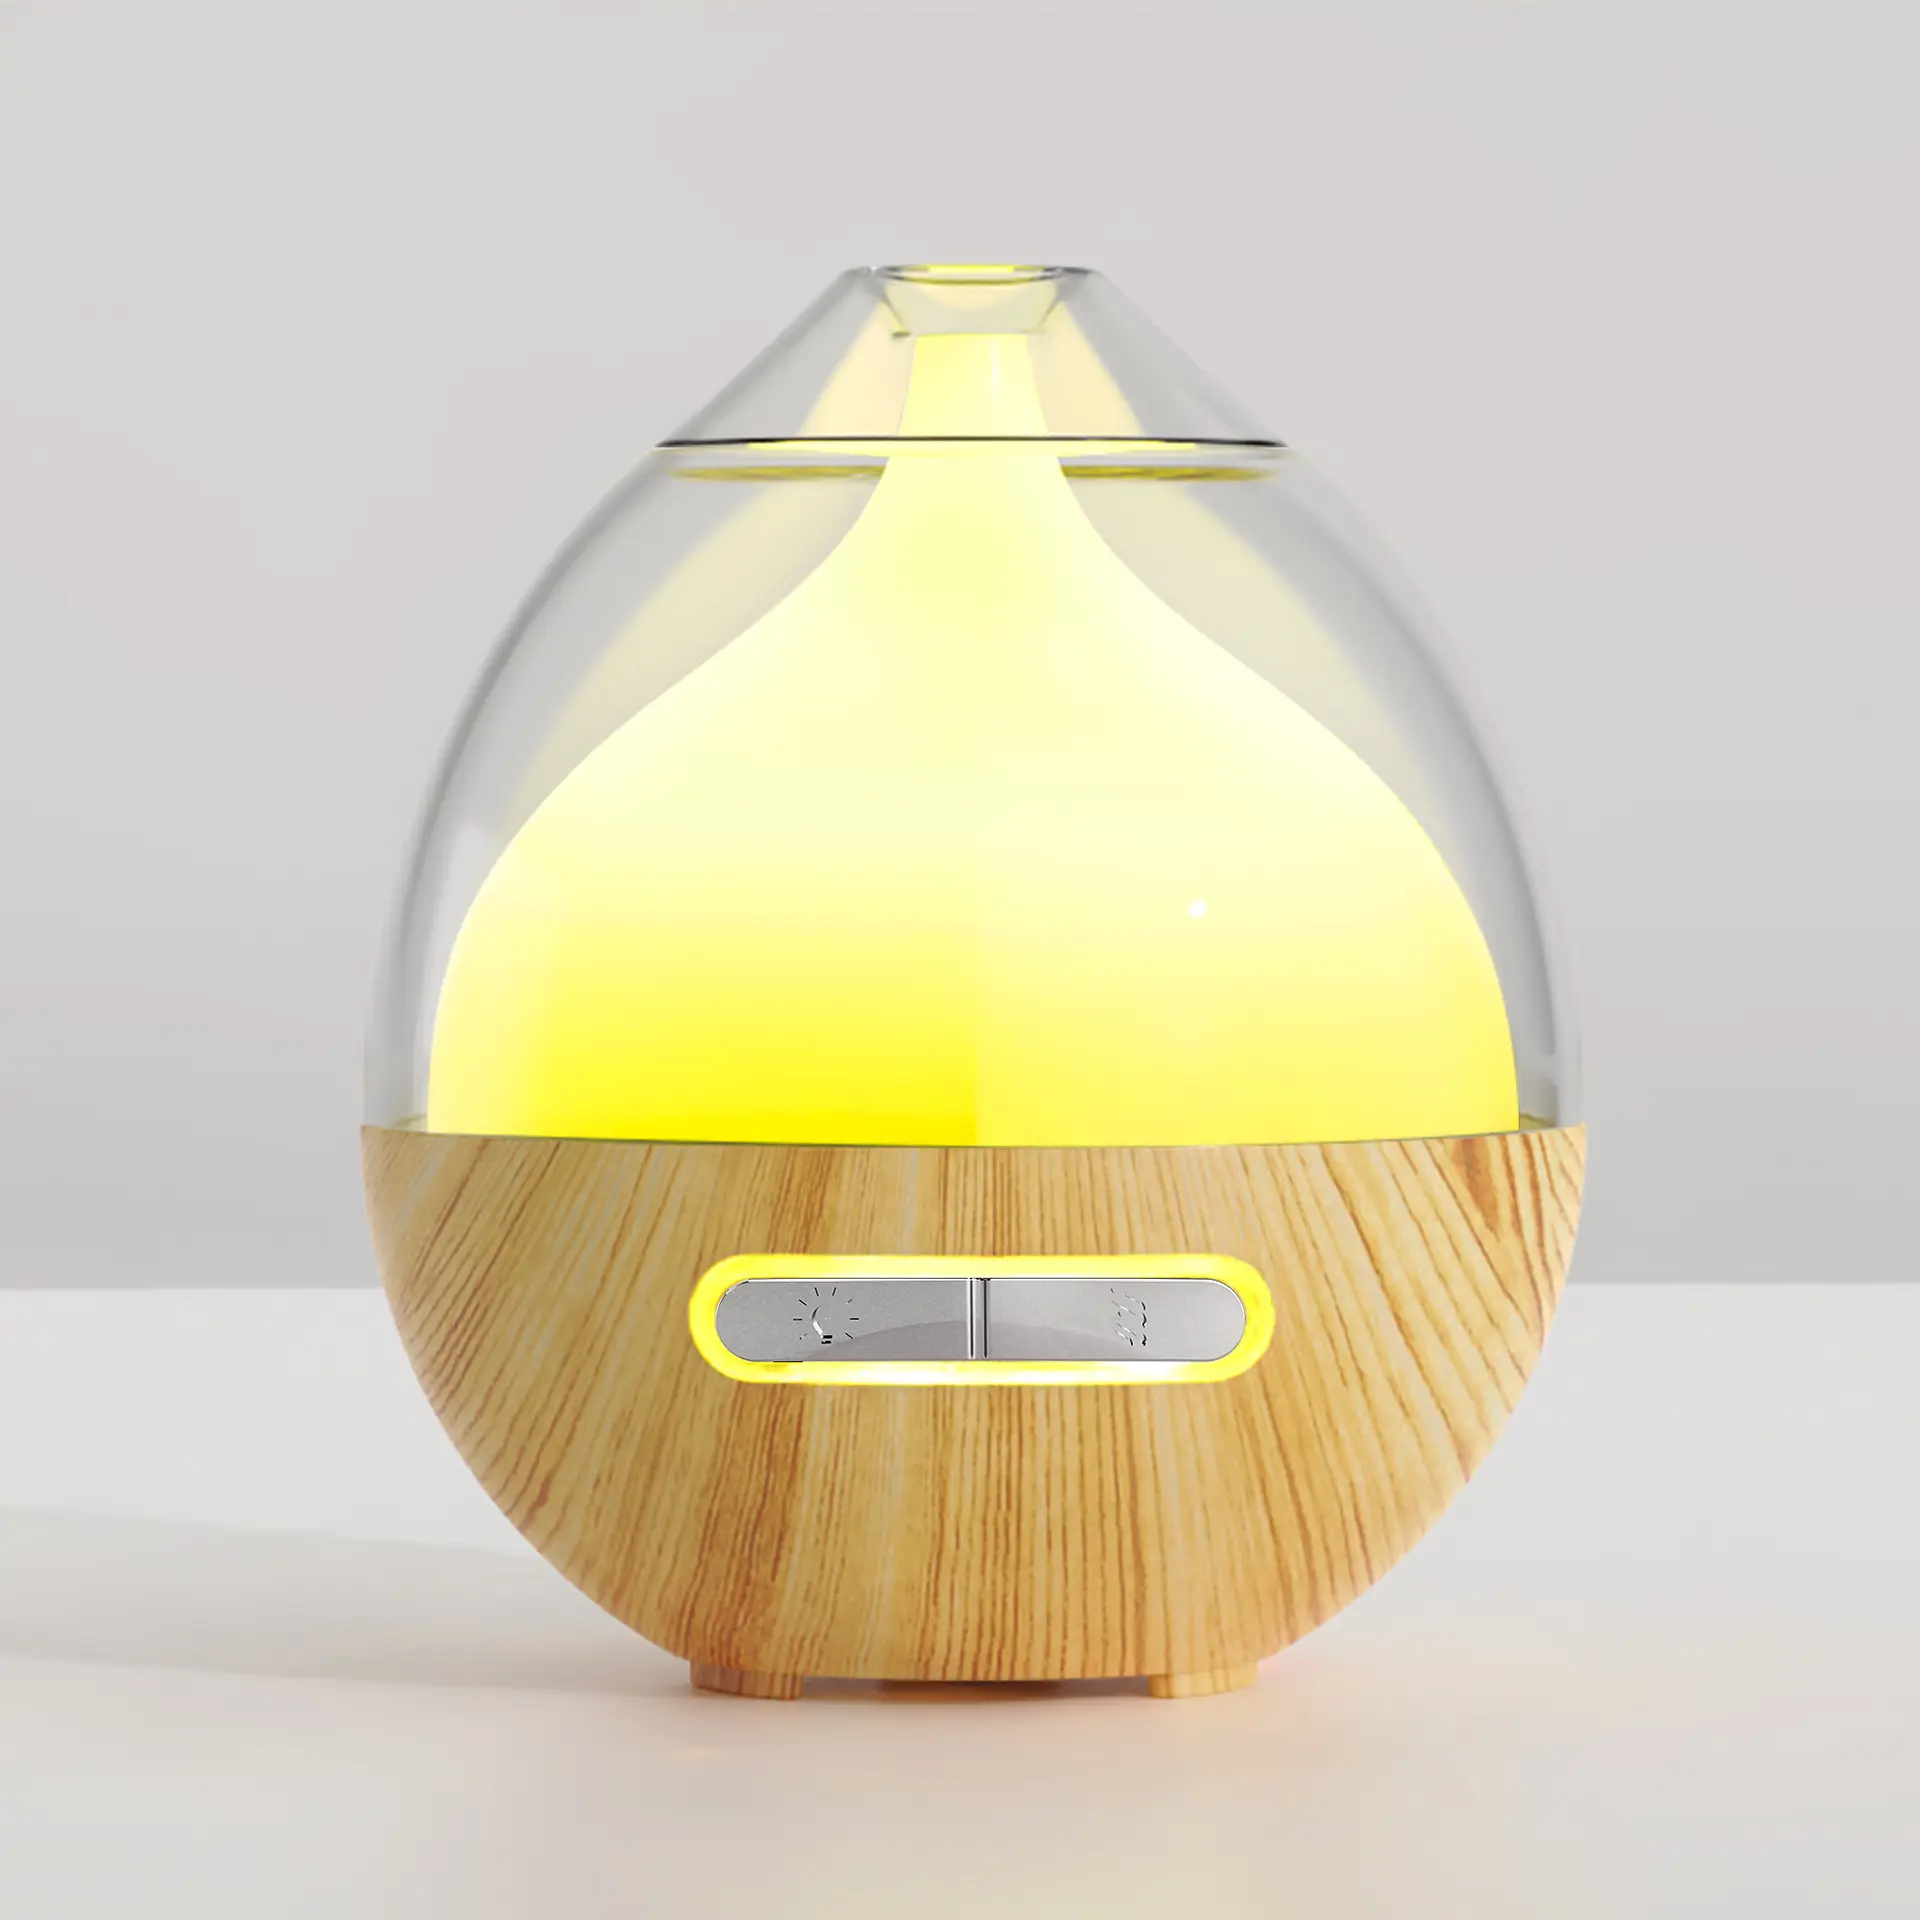 Ball Essential Oils Mini Diffuser 80ml Clear Cover Round Cool Mist Humidifier with 7 Color Led Change